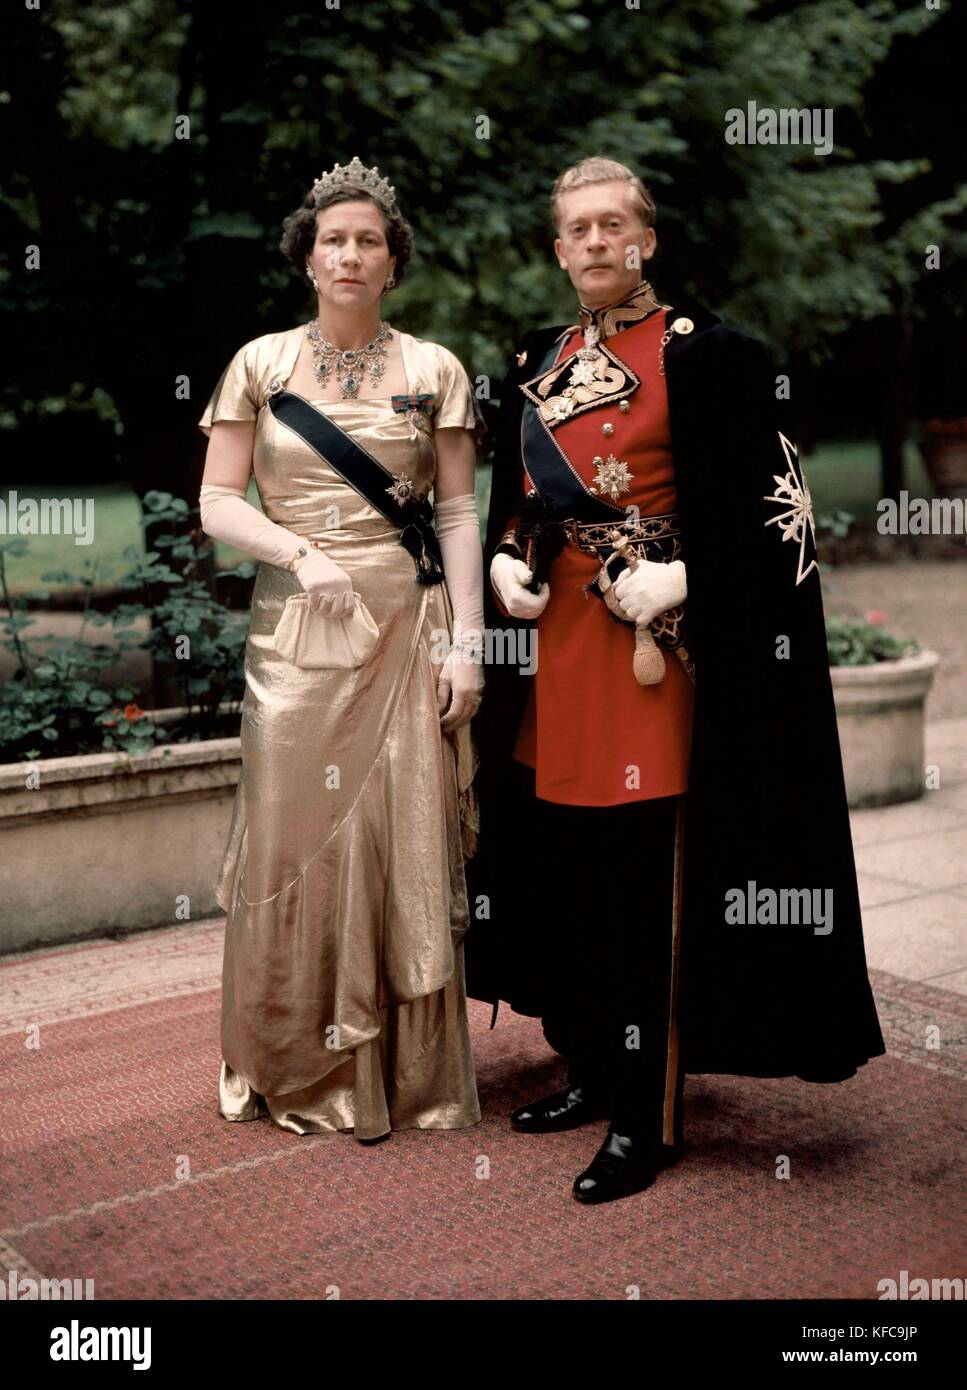 Princess Eugenie of Greece ( 1910- 1989) and her second husband Prince Raymond of Tour and Taxis ( 1907-1986)  1953  Taponier Photo Photo12.com - Coll. Taponier Stock Photo